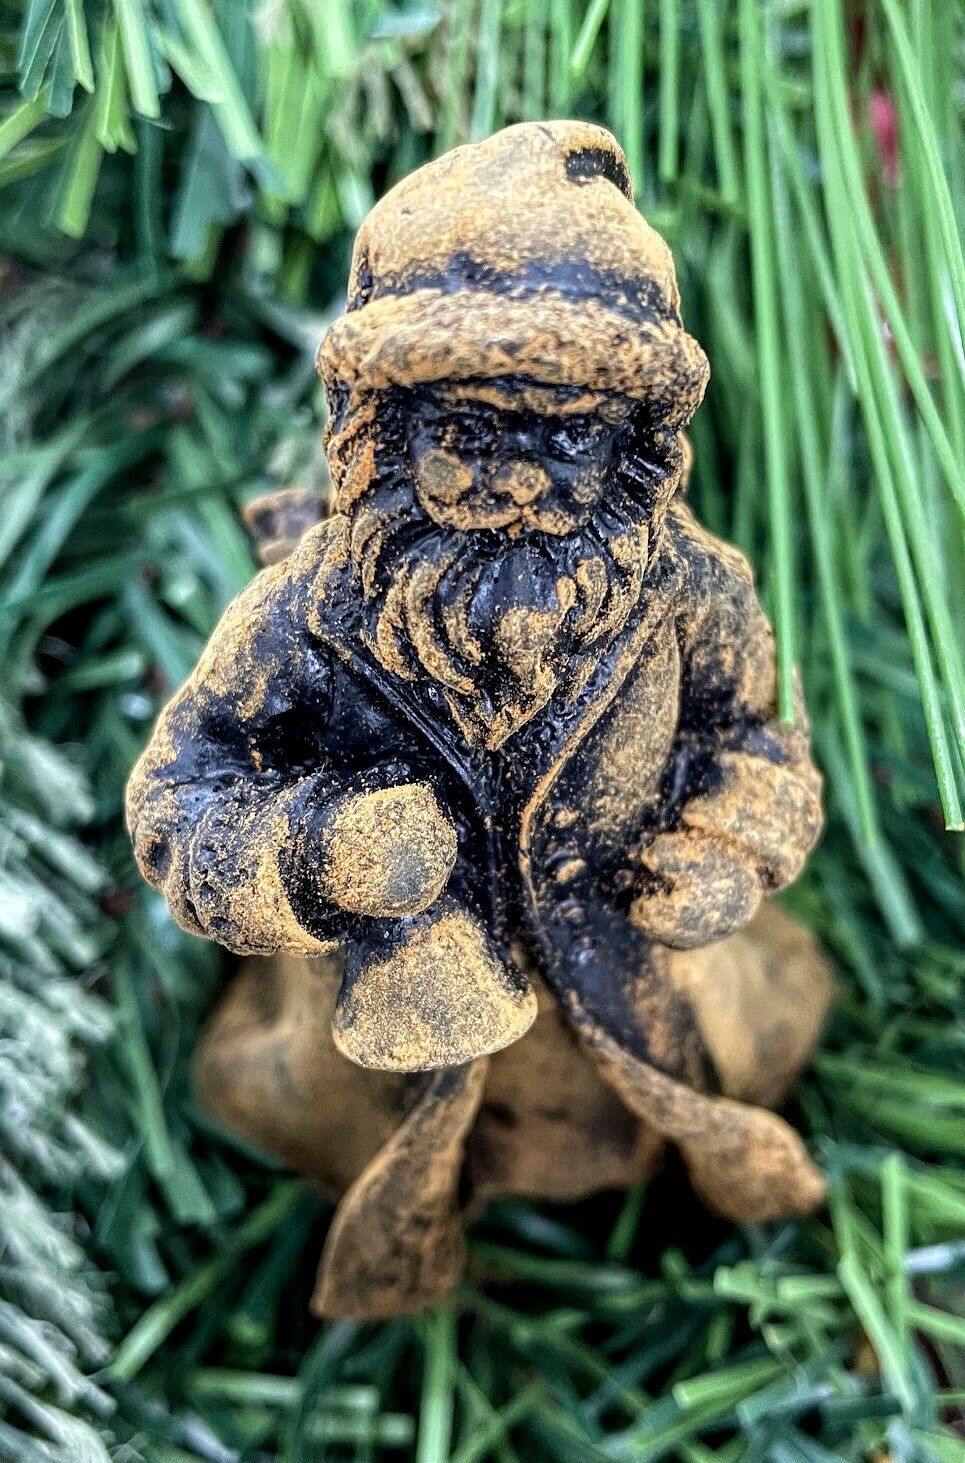 Primitive/Colonial Scented Blackened Beeswax St Nicholas/Santa Figure - The Primitive Pineapple Collection